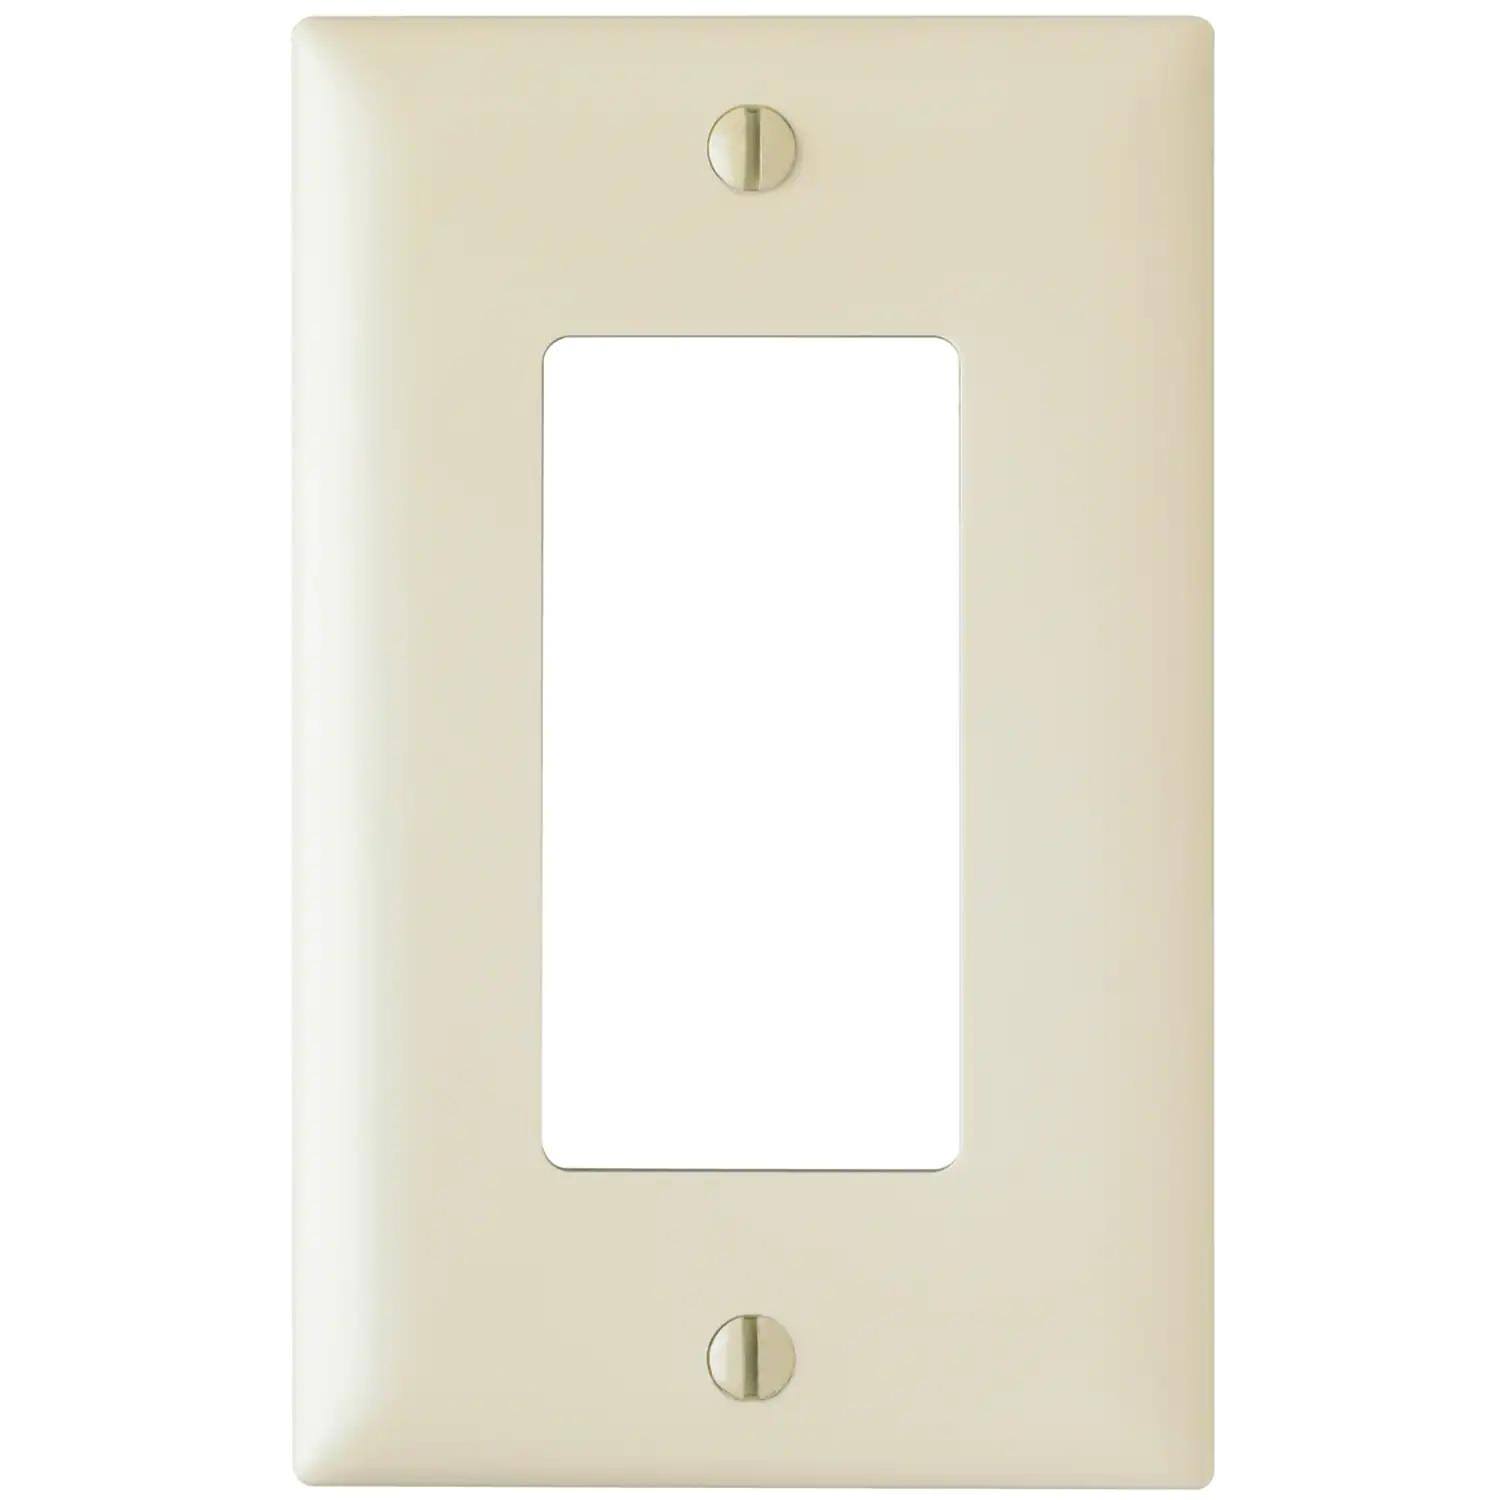 Pass and Seymour Tp26lacc100 Wall Plate - Light Almond, 1 Gang